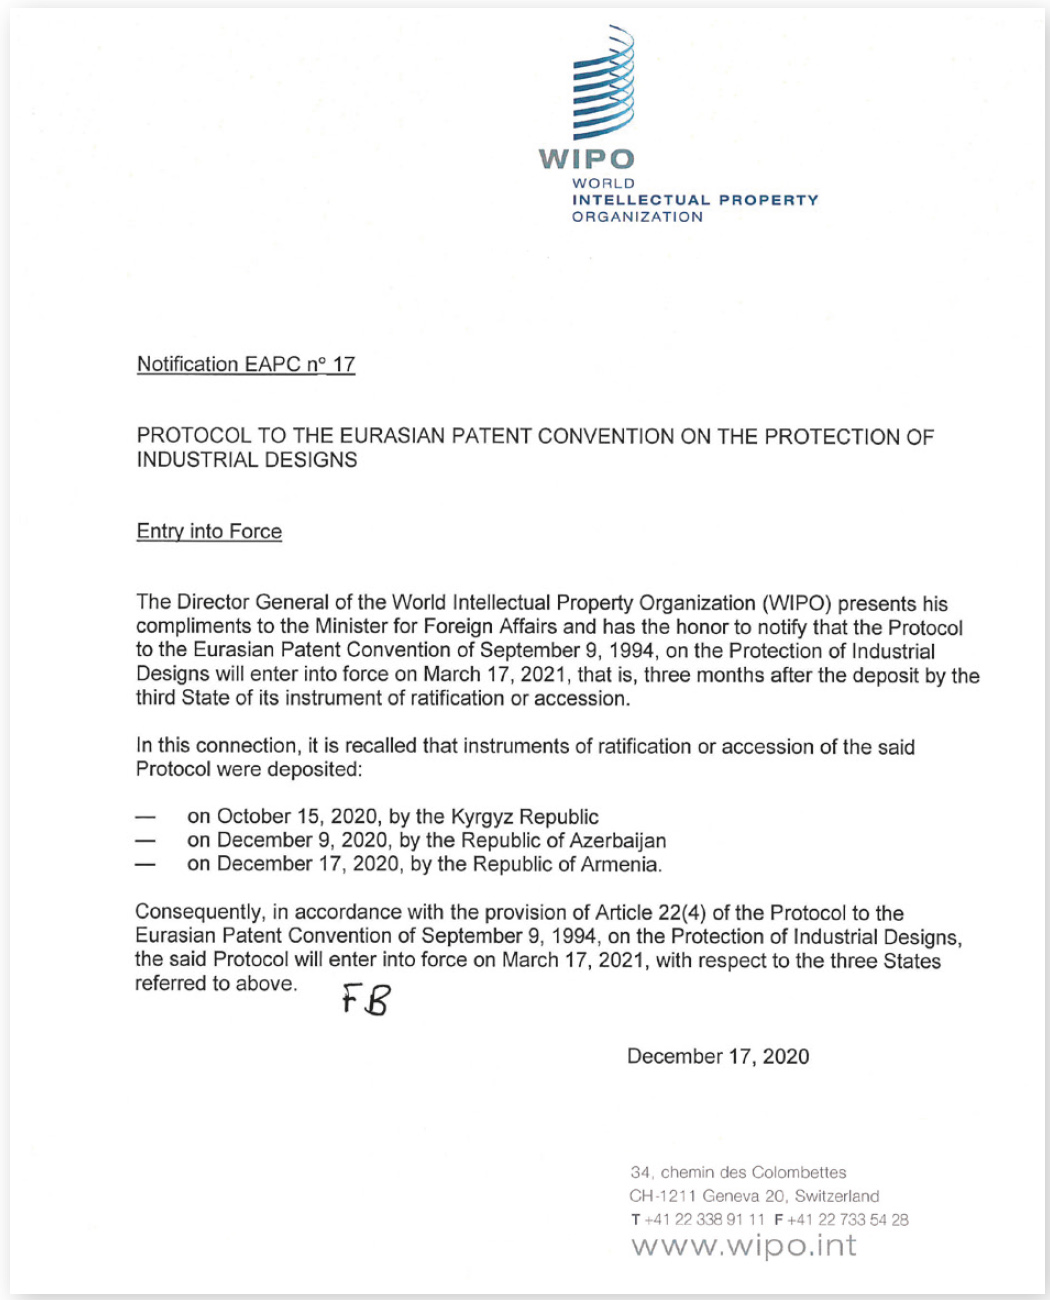 WIPO notification, dated December 17, 2020